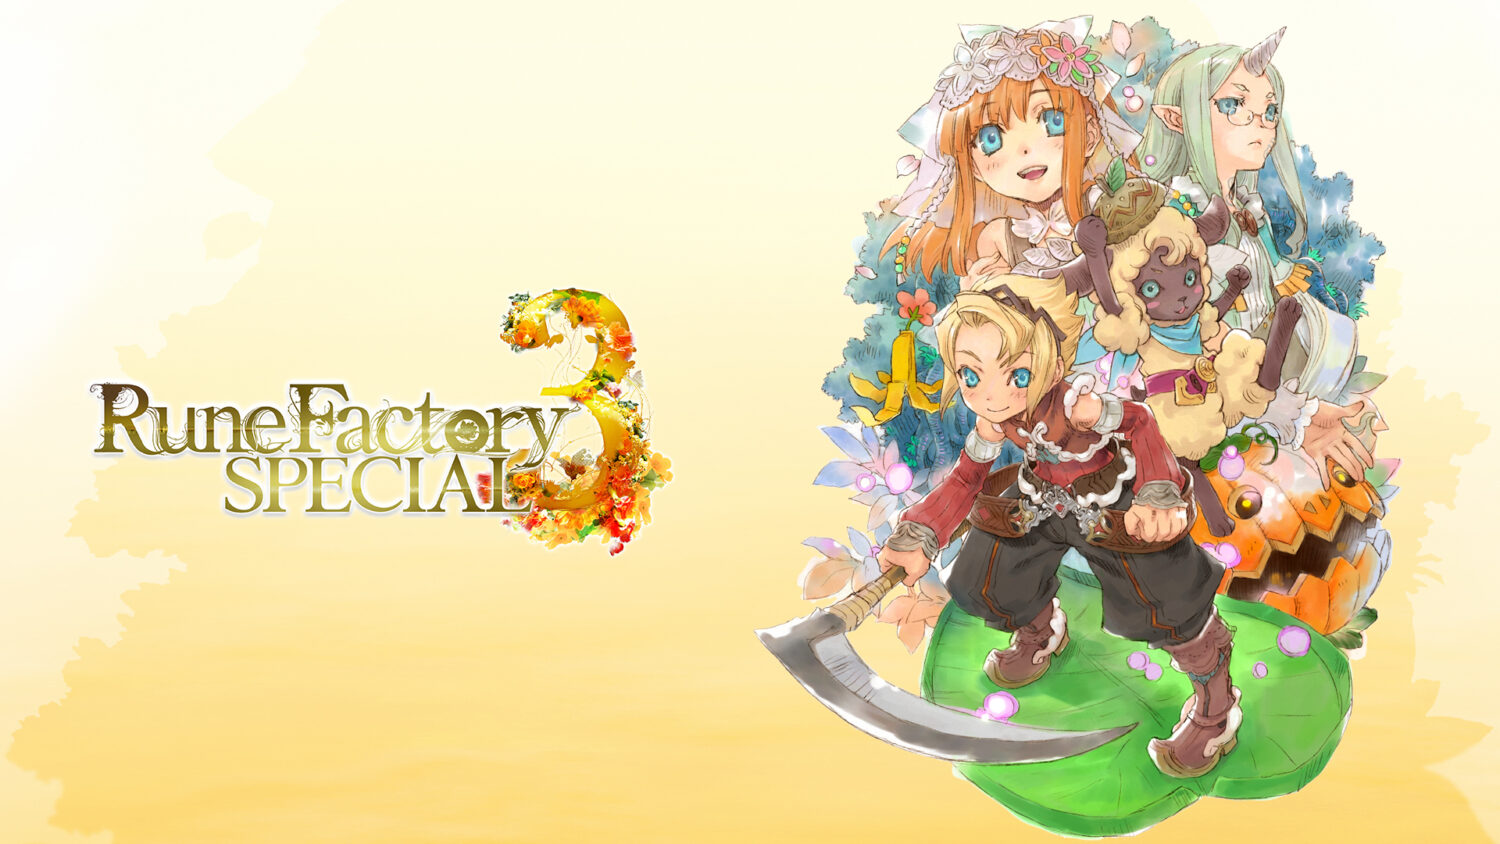 Rune Factory 3 Special - Nintendo Switch